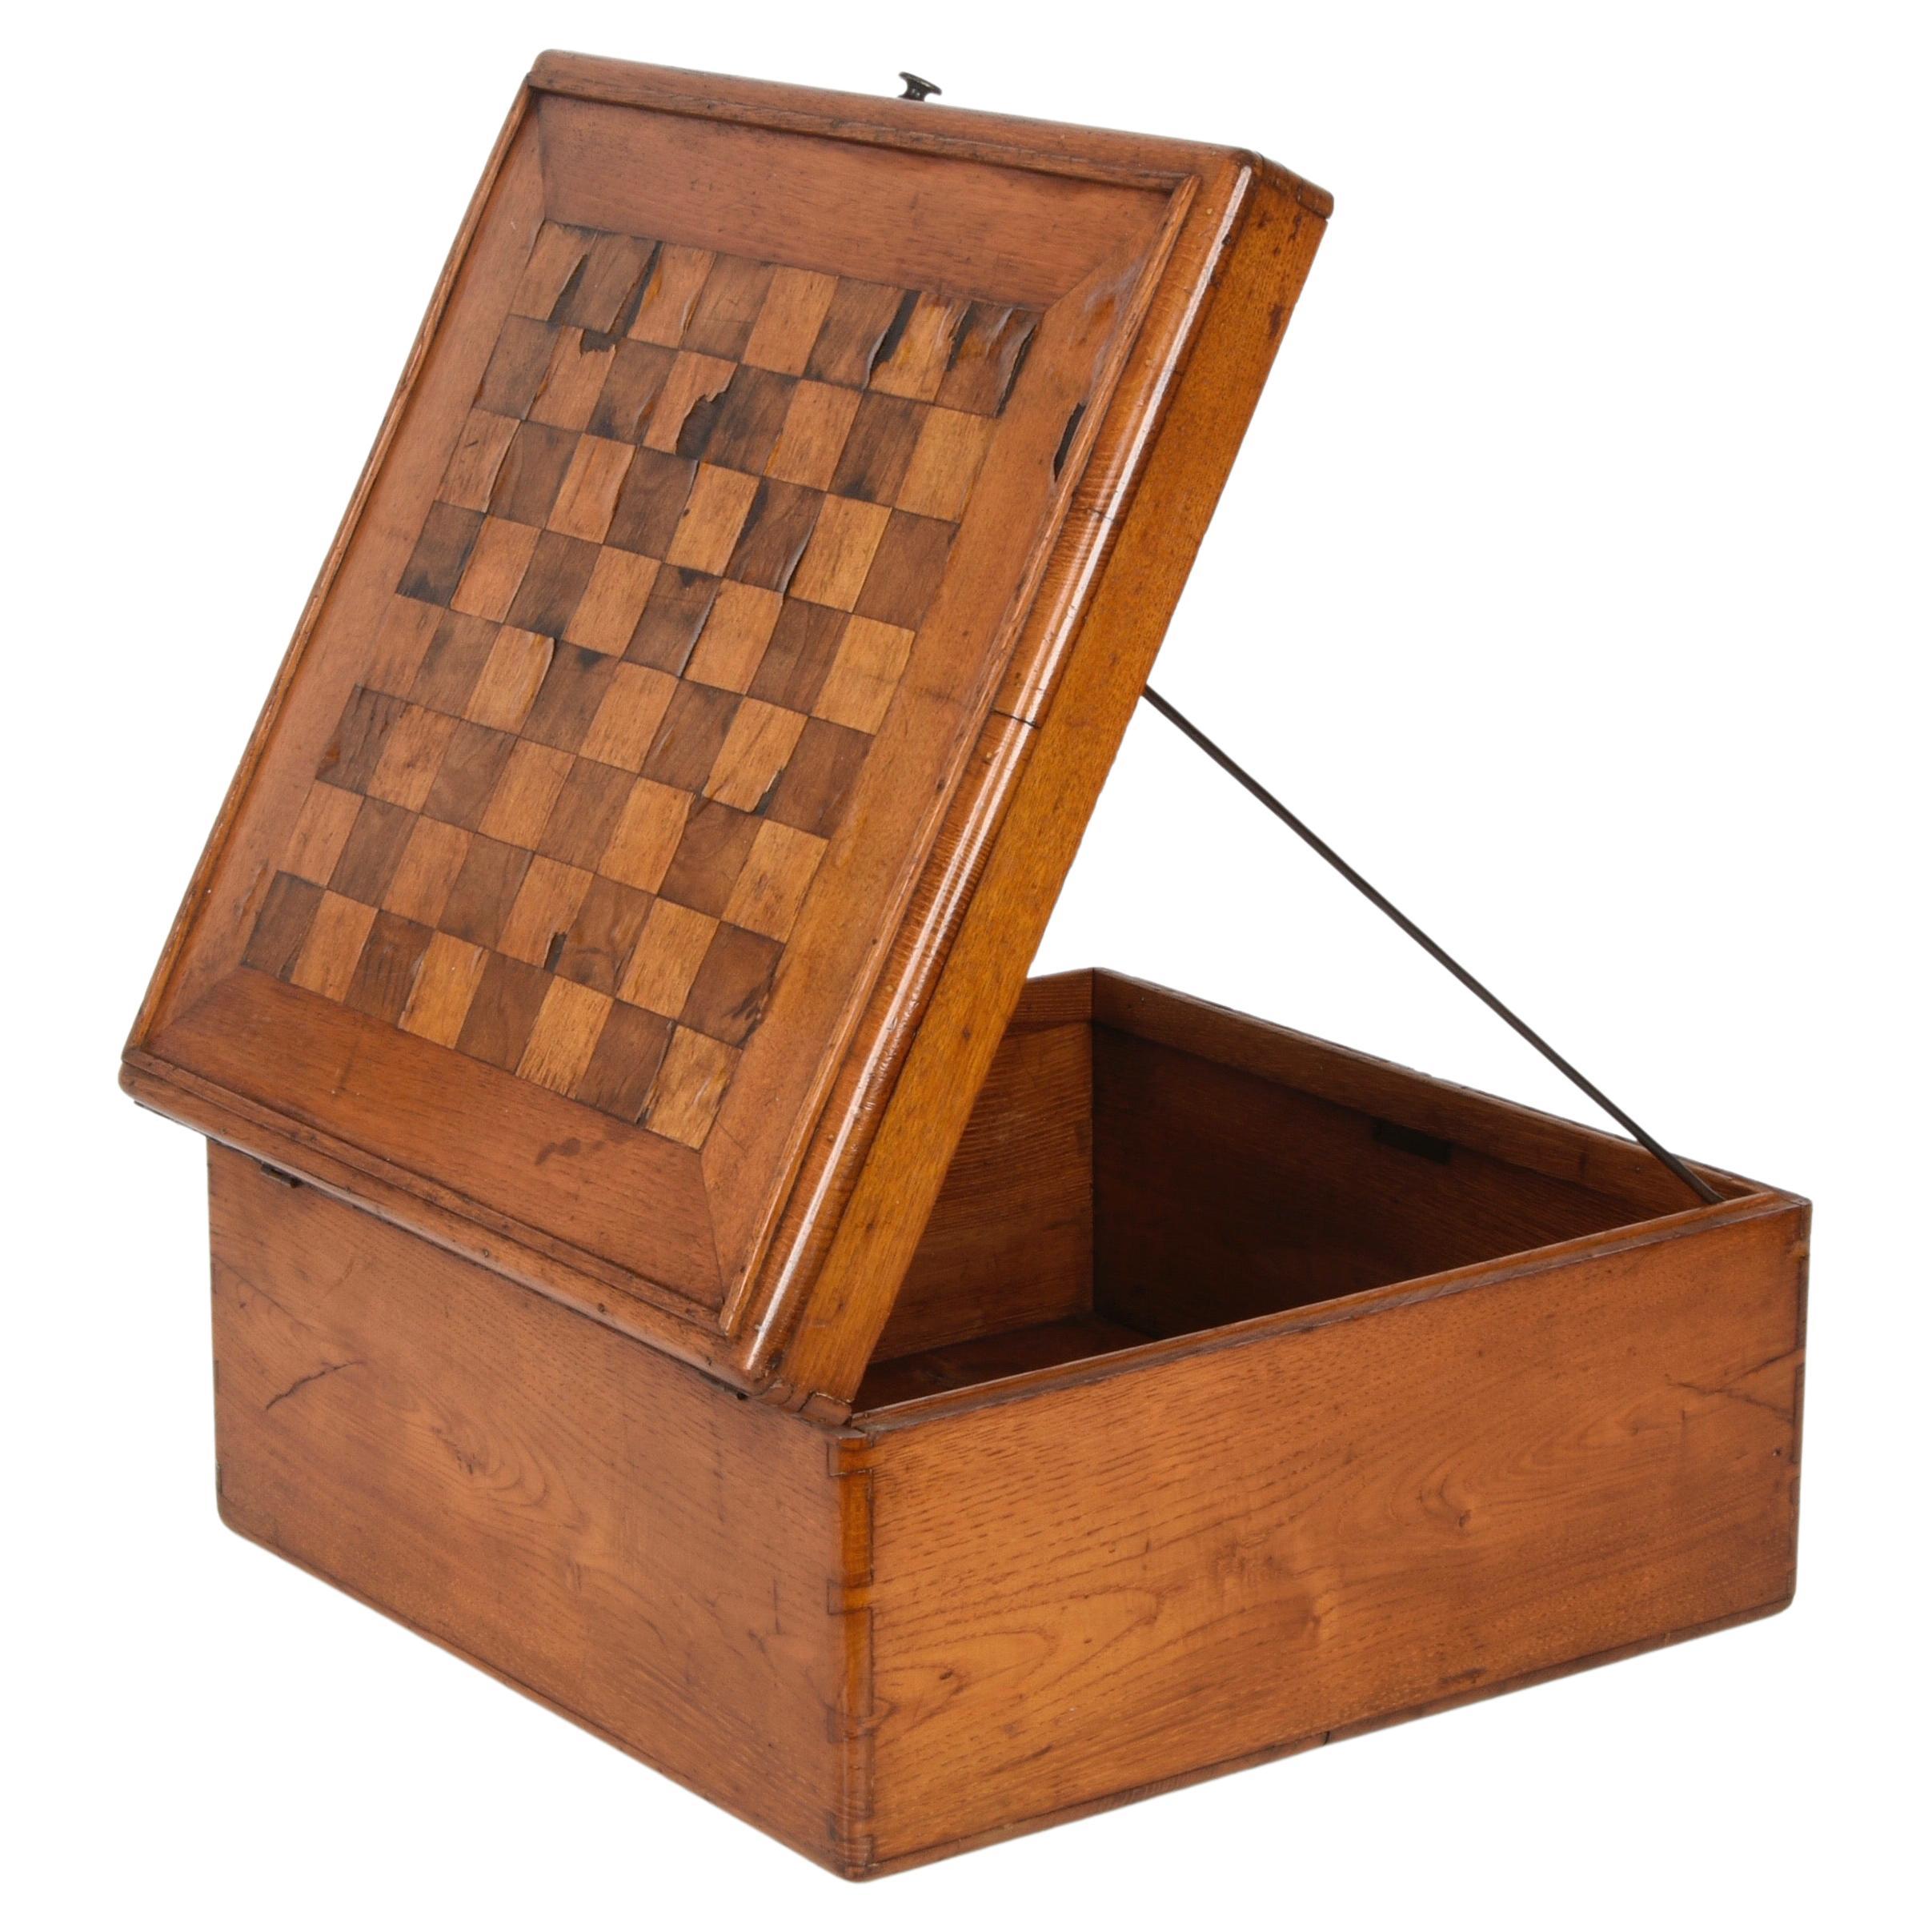 Exquisite large wooden inlaid squared chessboard box. This fantastic item was designed in Italy during the beginning of the 20th century.

This handmade box is fantastic because it has an amazing chessboard made of a combination of pine and oak